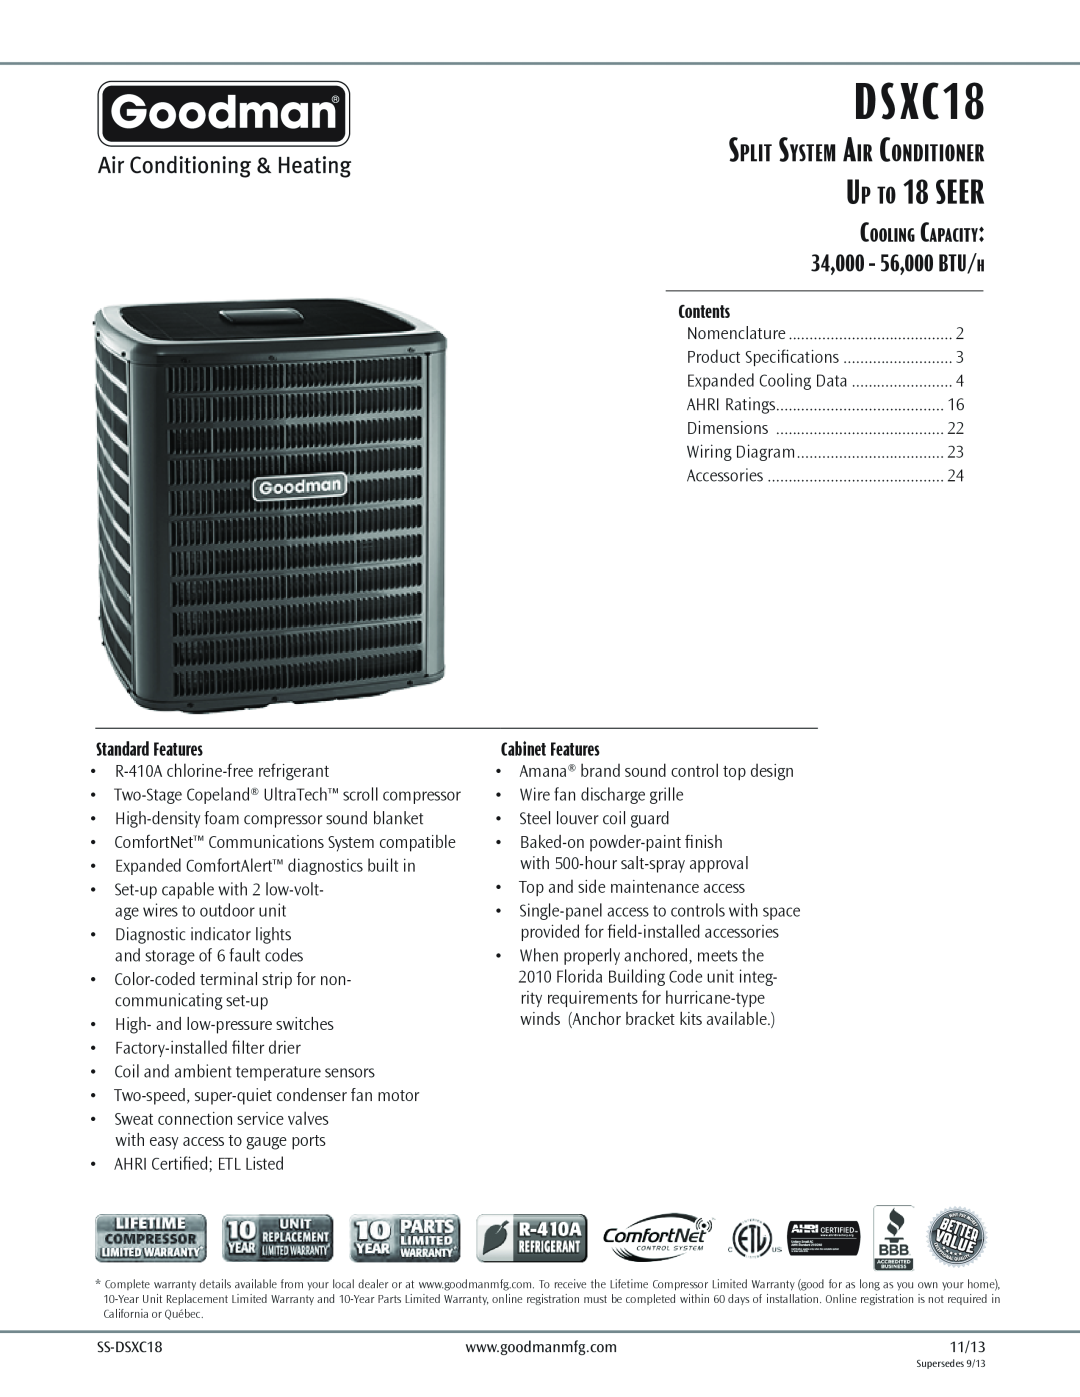 Goodmans Split System Air Conditioner warranty 34,000 - 56,000 BTU/ h, DSXC18, Up to 18 SEER, Cooling Capacity, Contents 